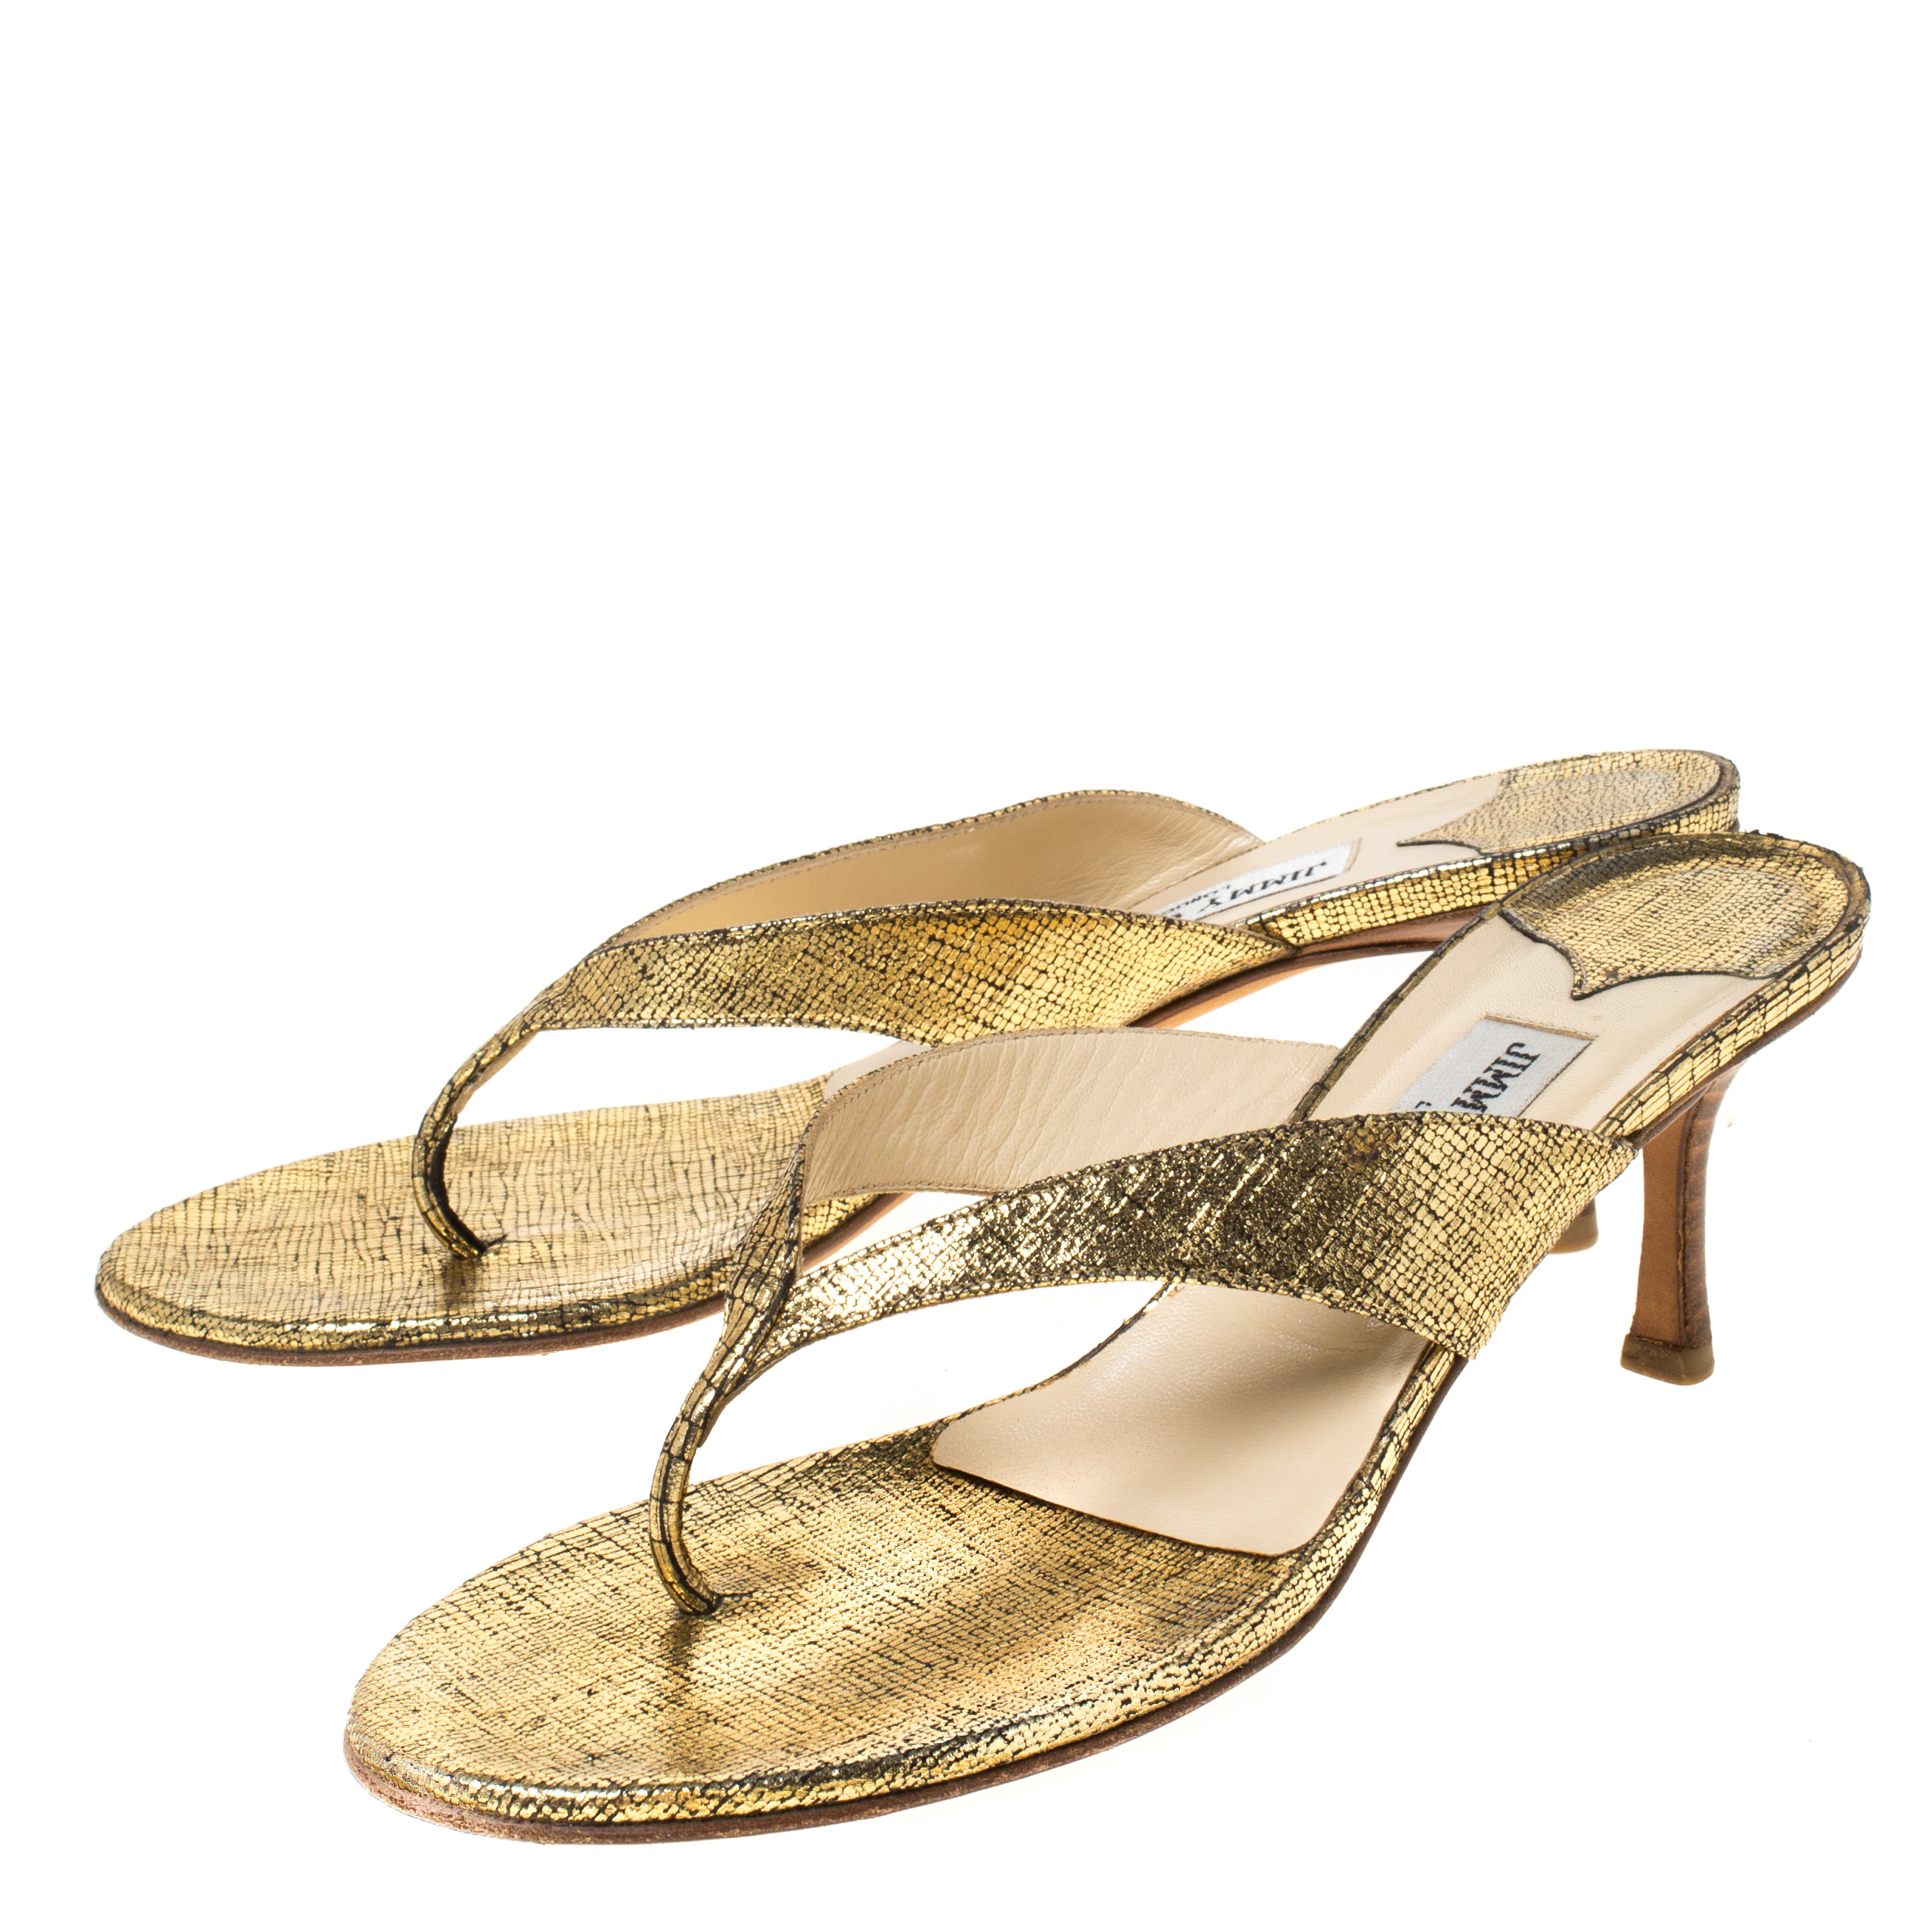 Jimmy Choo Gold Textured Leather Thong Wooden Heel Sandals Size 39.5